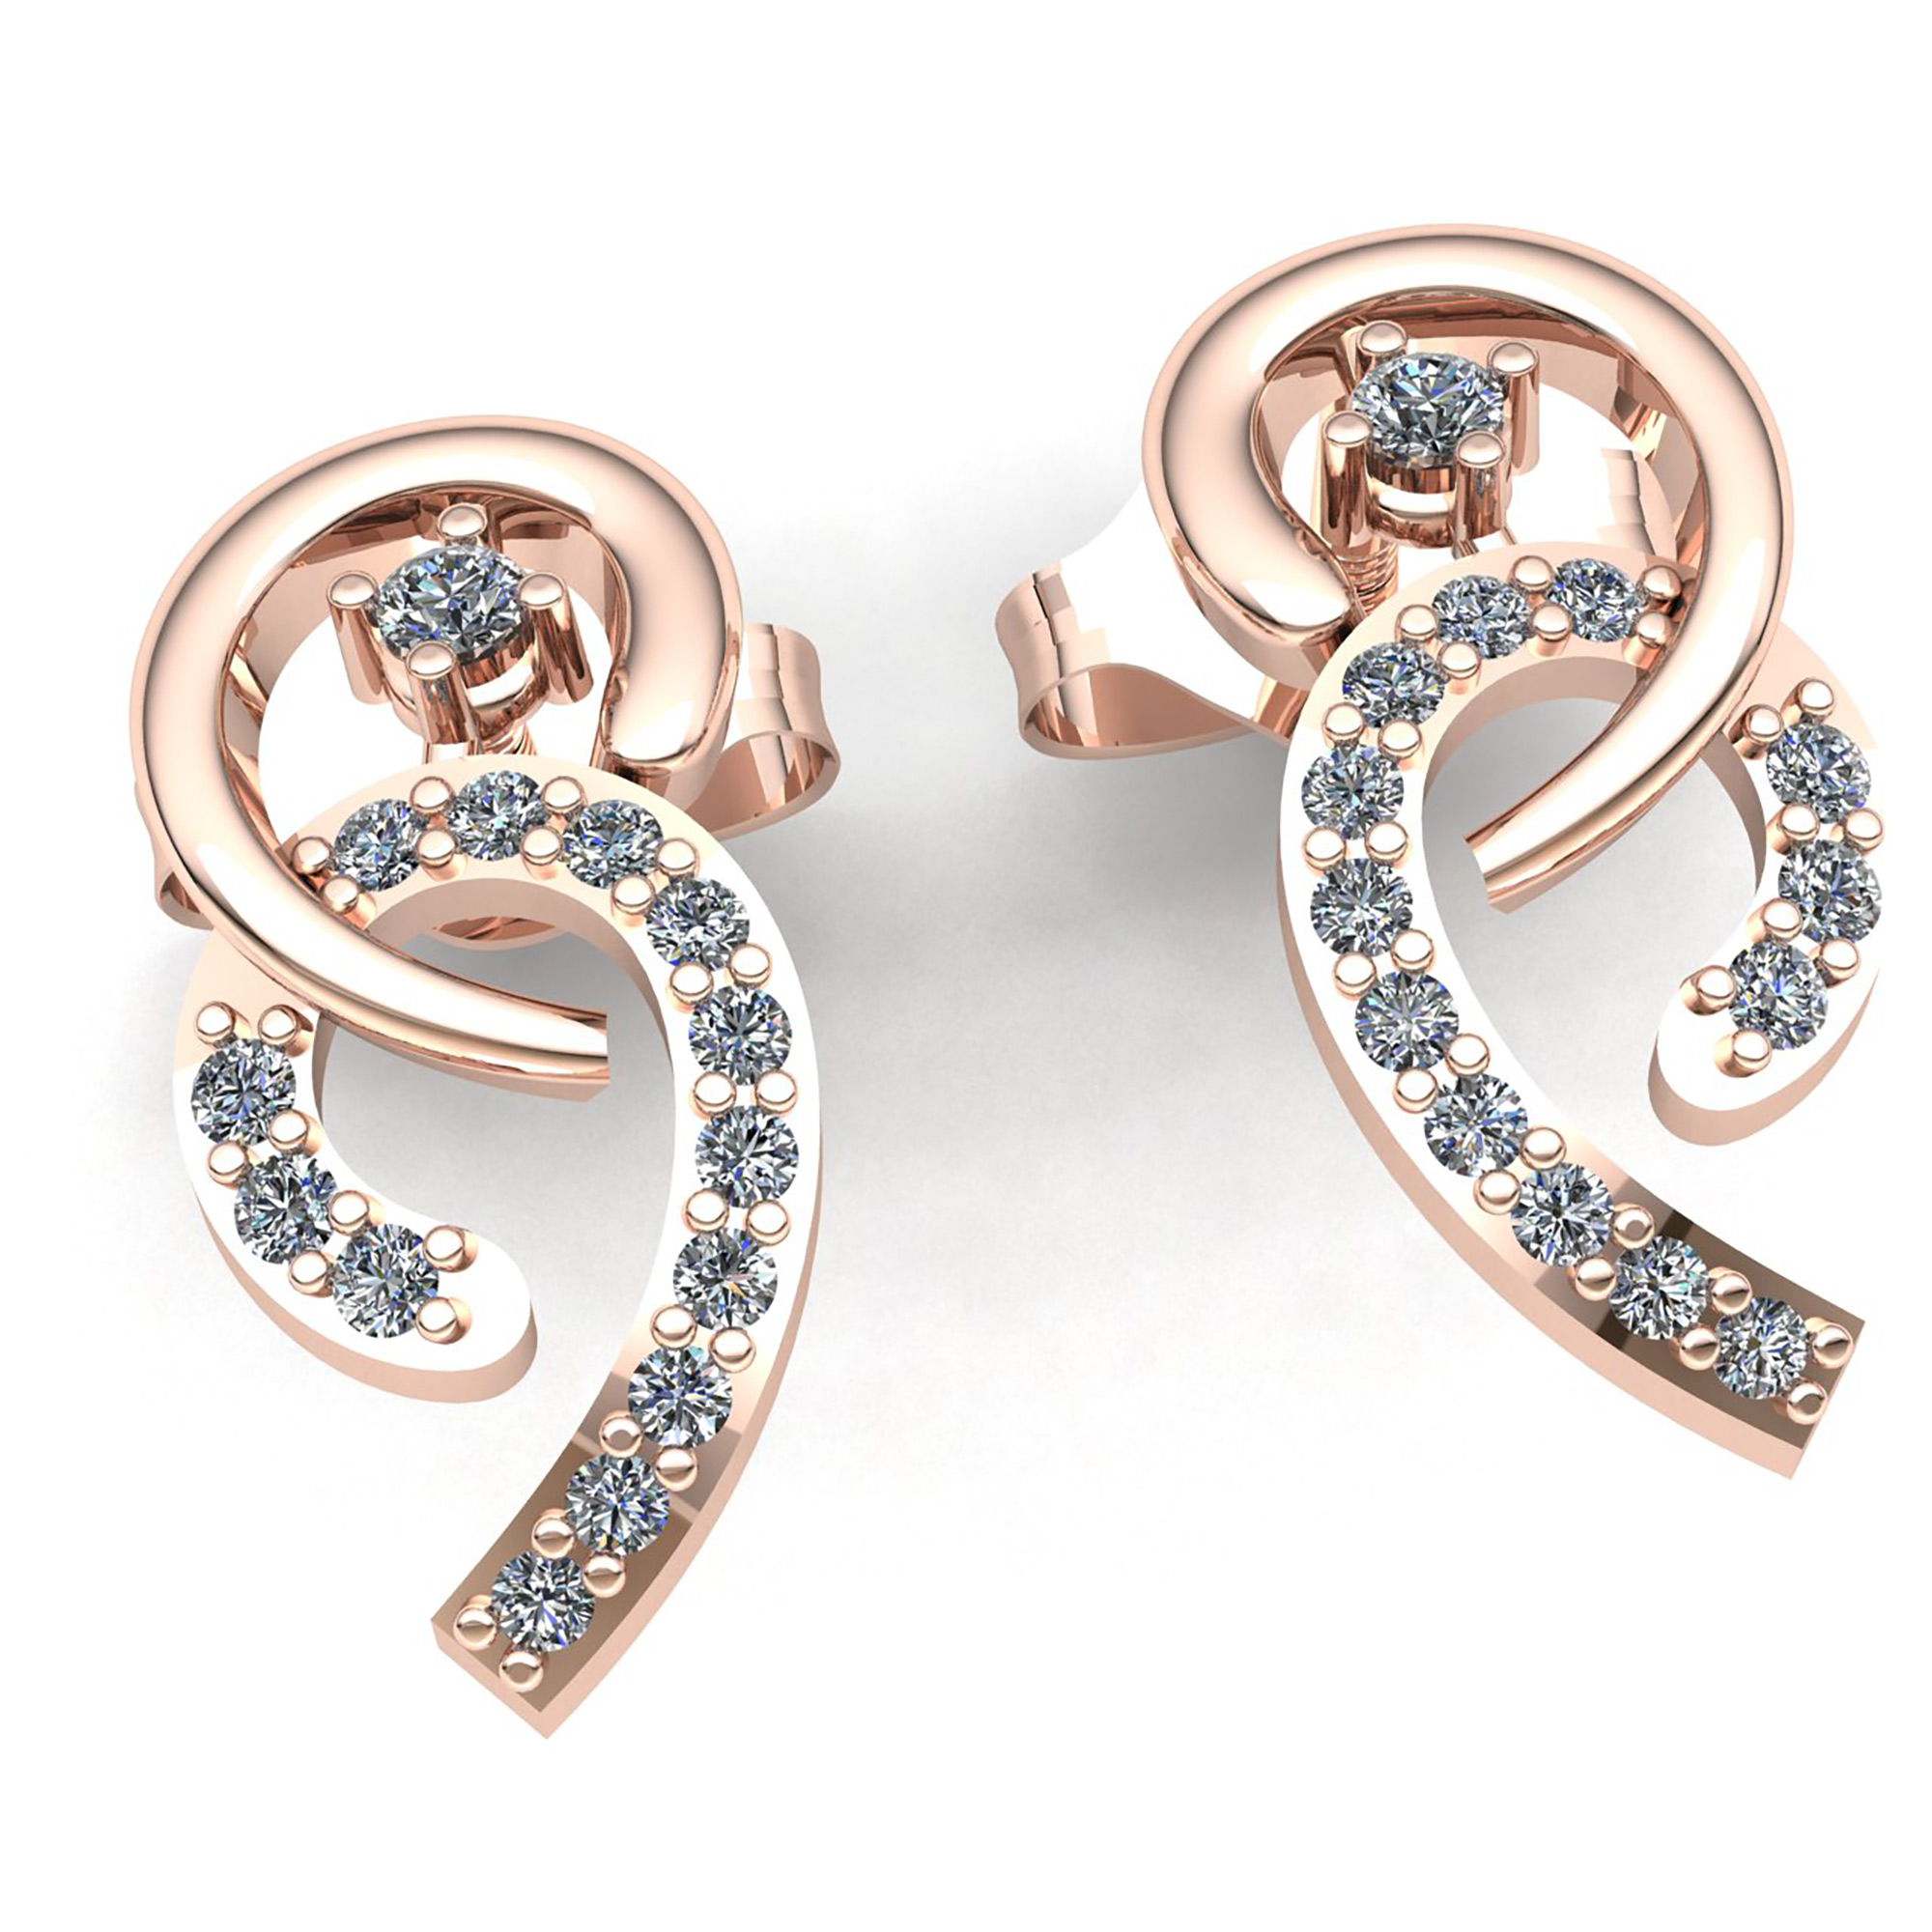 Jewel We Sell 0.2ctw Round Brilliant Cut Diamond Ladies Fancy Earrings 18K White, Yellow or Rose Gold F VS1